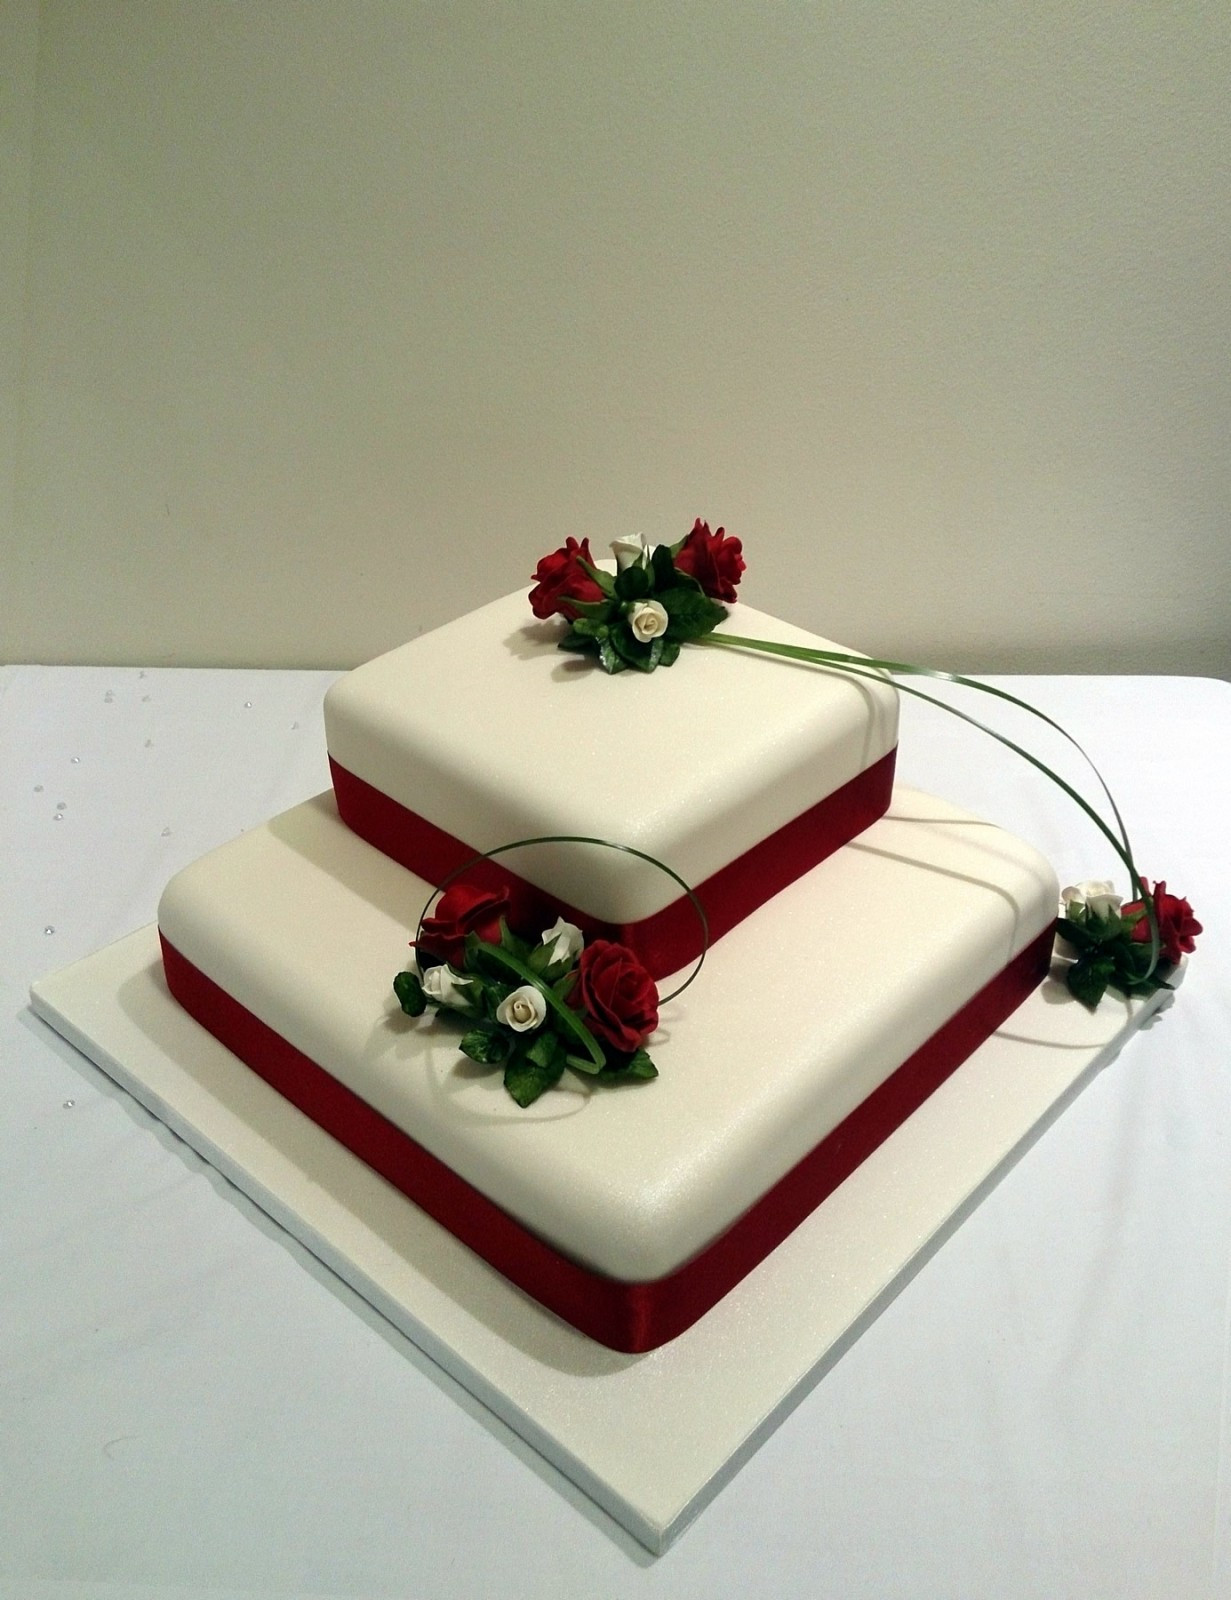 2 Tier Square Wedding Cakes
 2 Tier Square Stacked Wedding Cake With Deep Red Rose